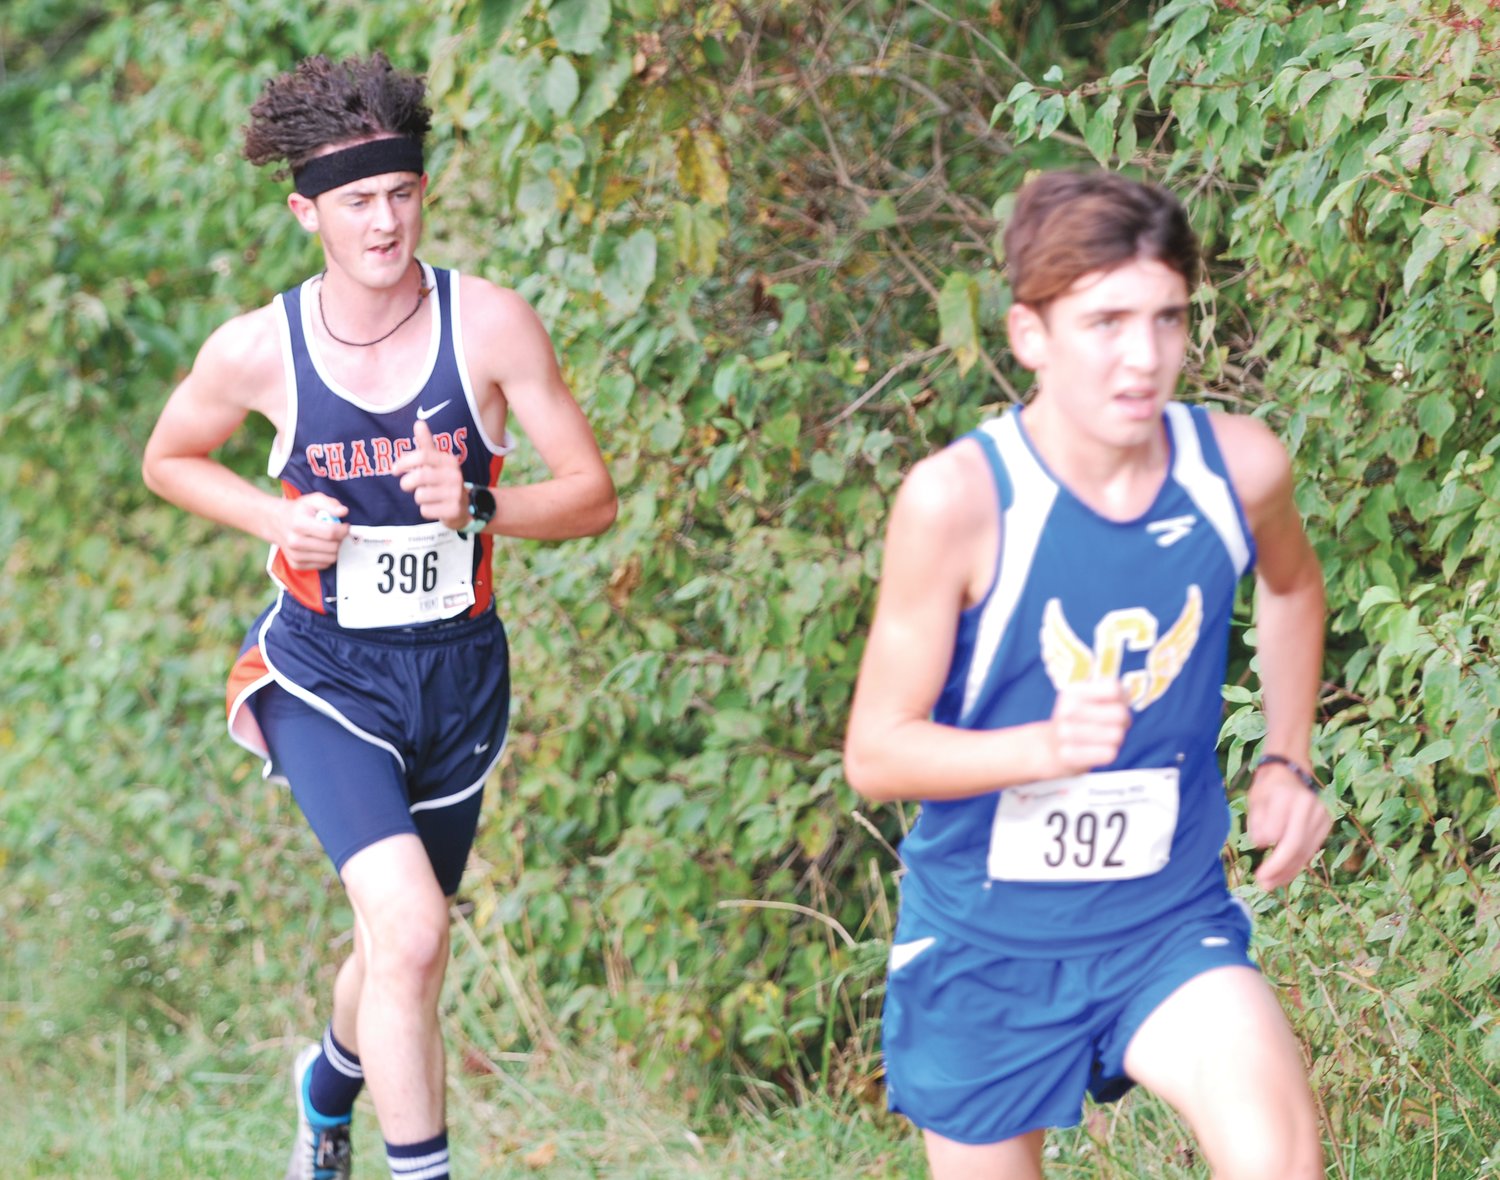 Crawfordsville's Ryan Miller and North Montgomery's Elijah McCartner finished third and fourth respectively at the Montgomery County meet on Thursday at Southmont.